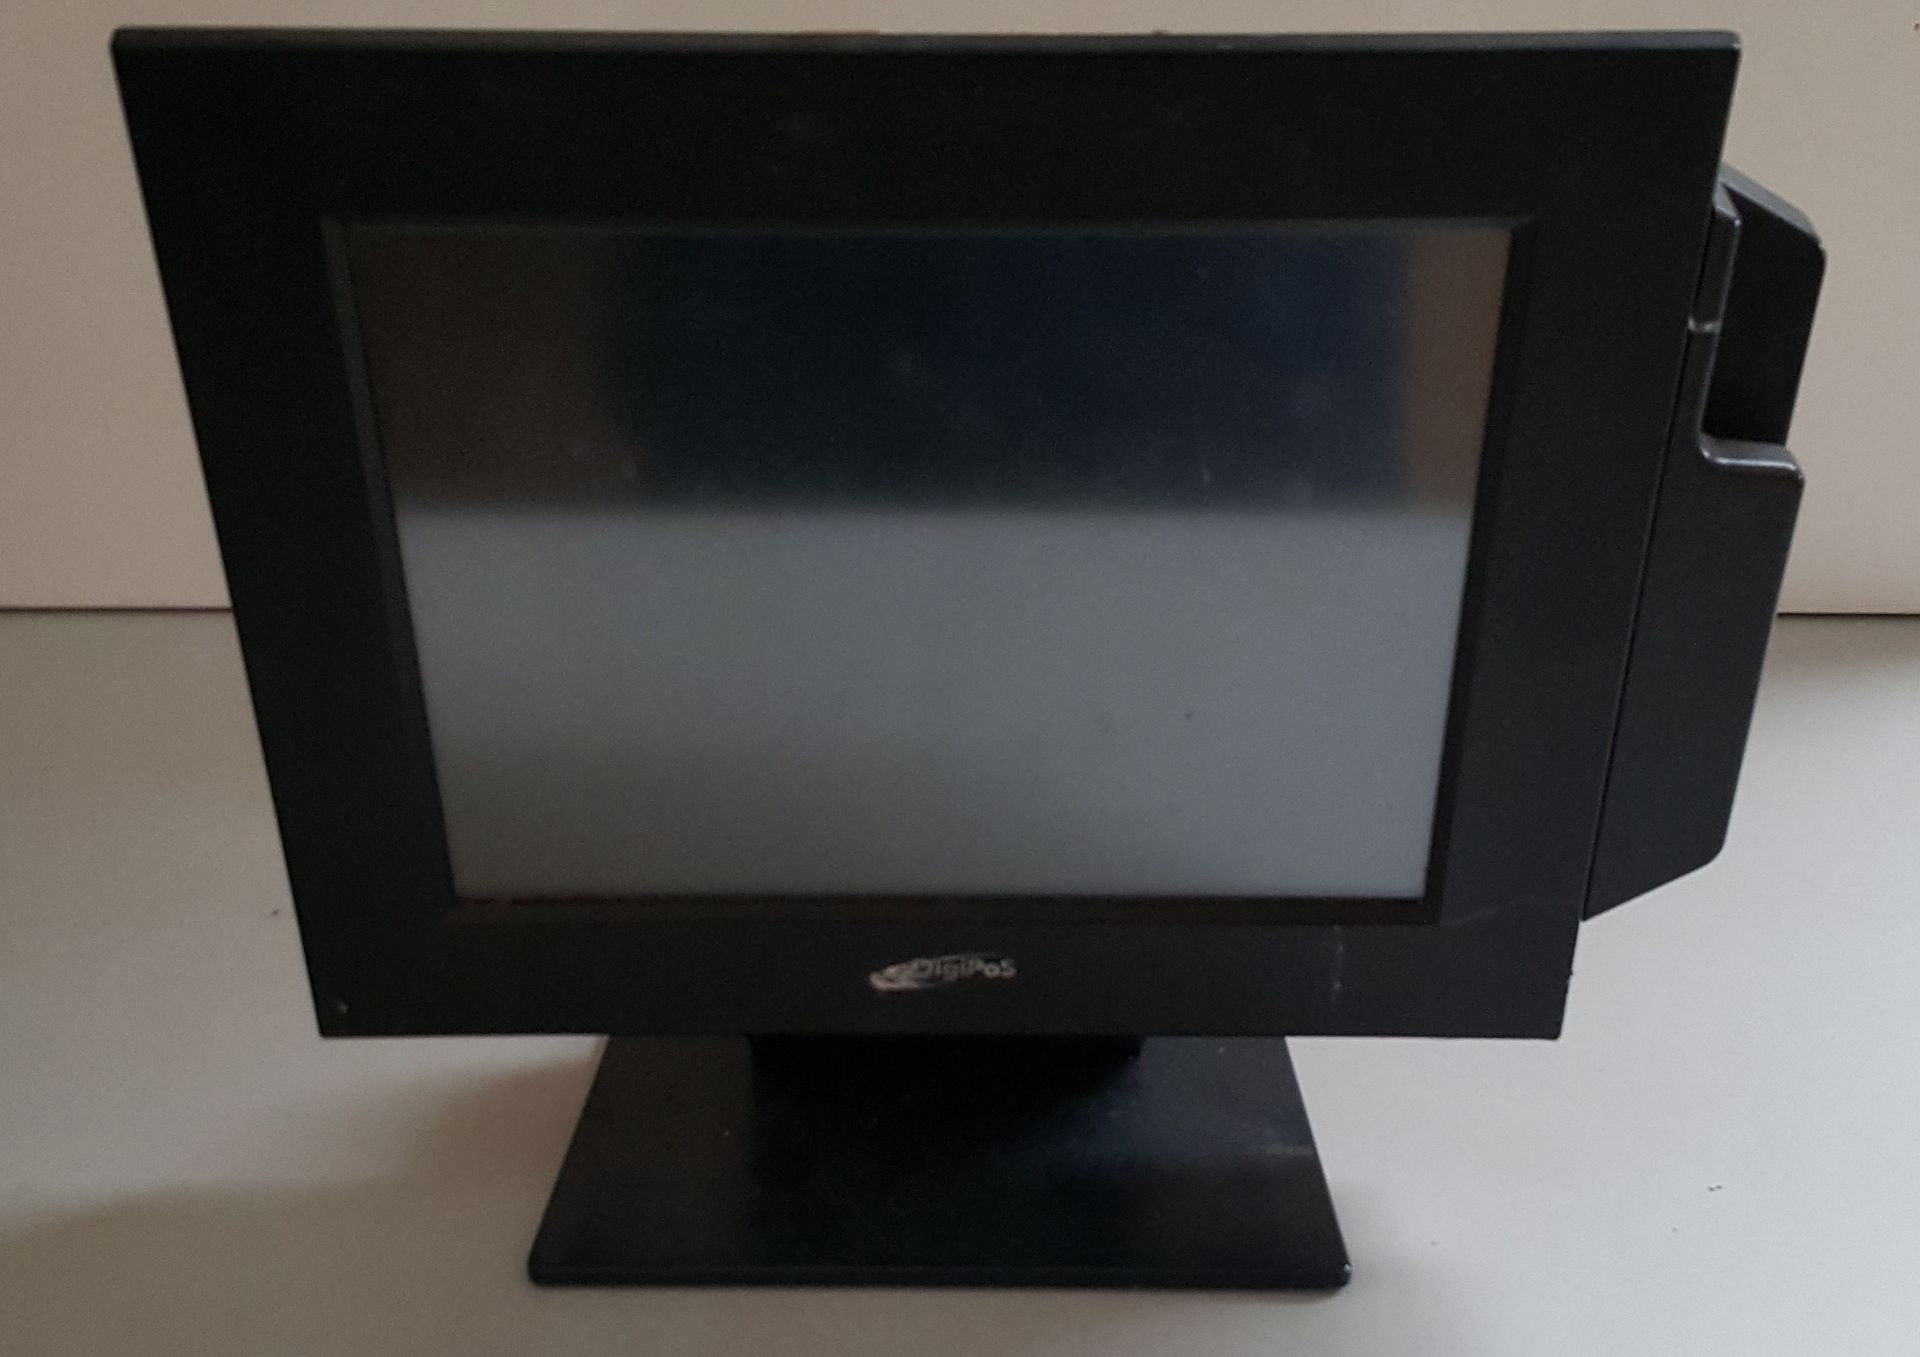 3 x Digipos 401 12" Display Touch Screen Monitor - Ref RC138 - CL011 - Location: Altrincham WA14 - Image 3 of 4